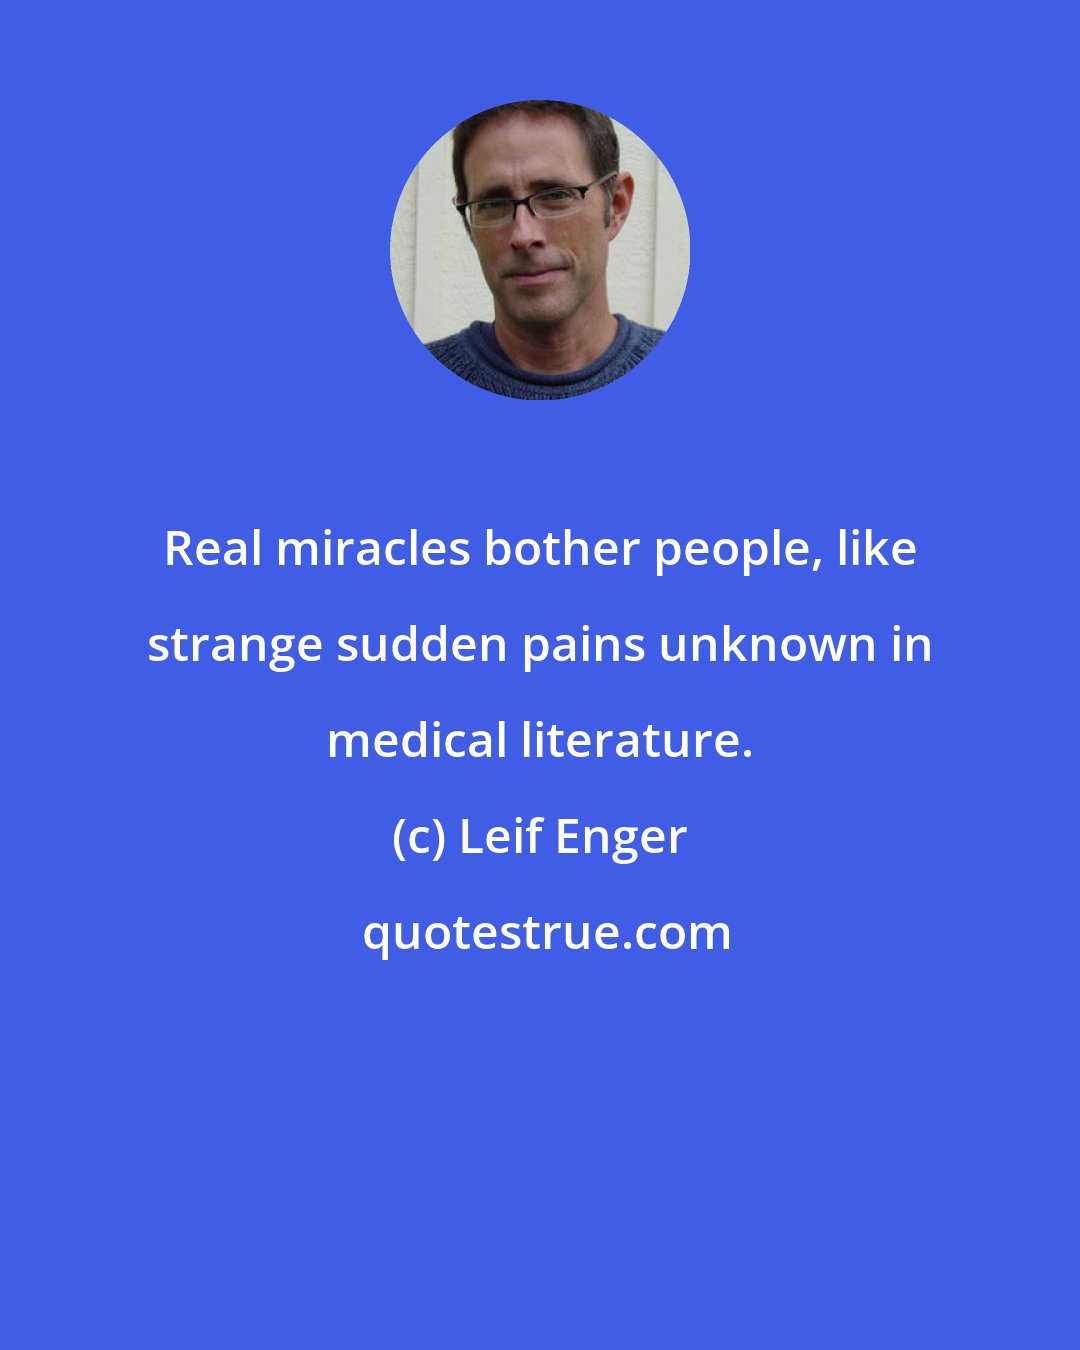 Leif Enger: Real miracles bother people, like strange sudden pains unknown in medical literature.